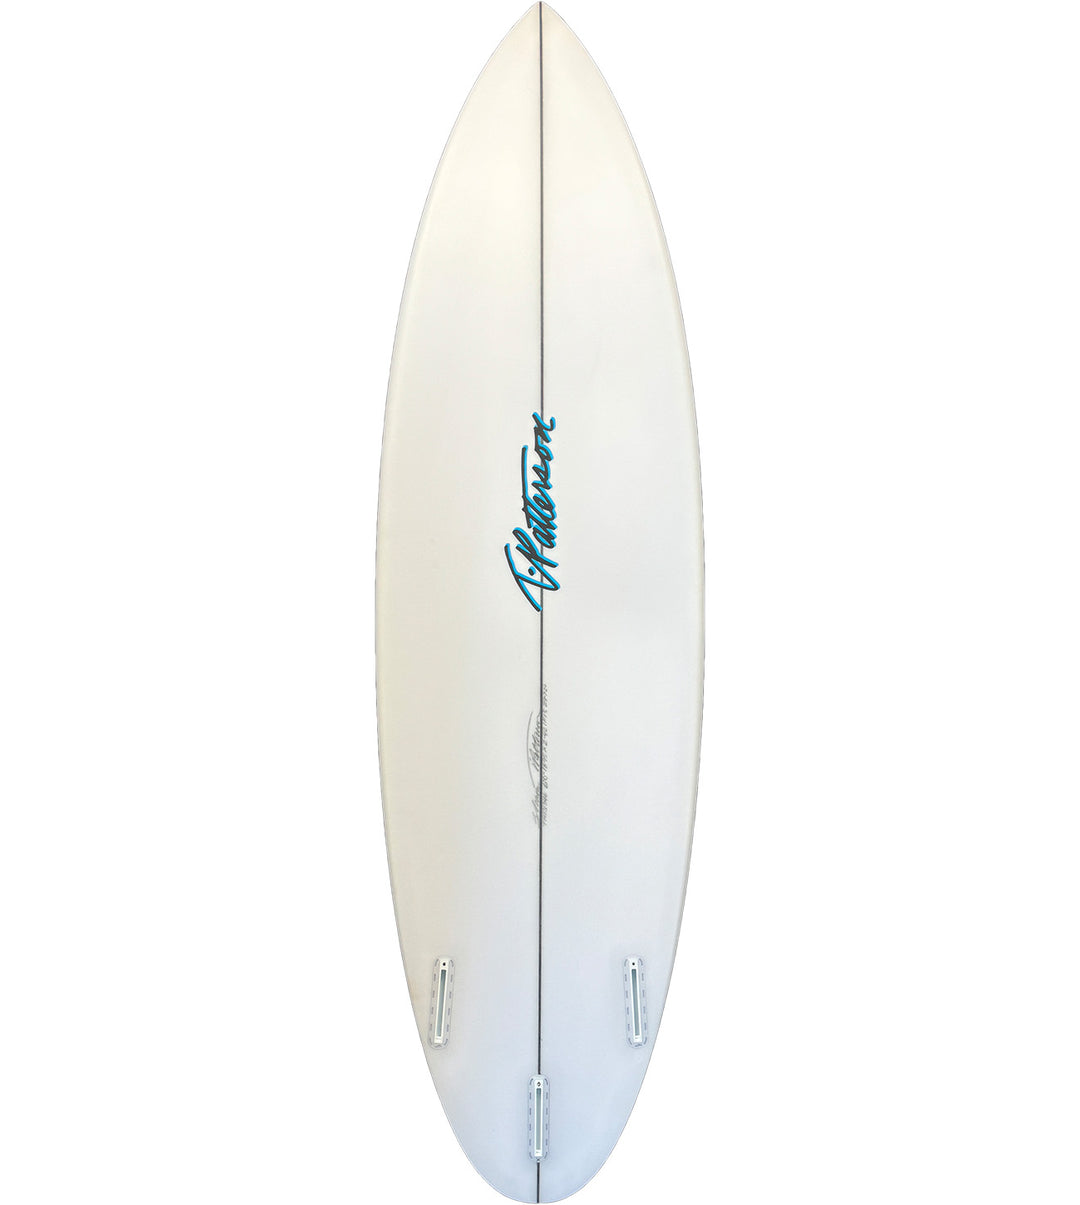 TPatterson Surfboard
IF15/Futures 6'0 #TPS231346